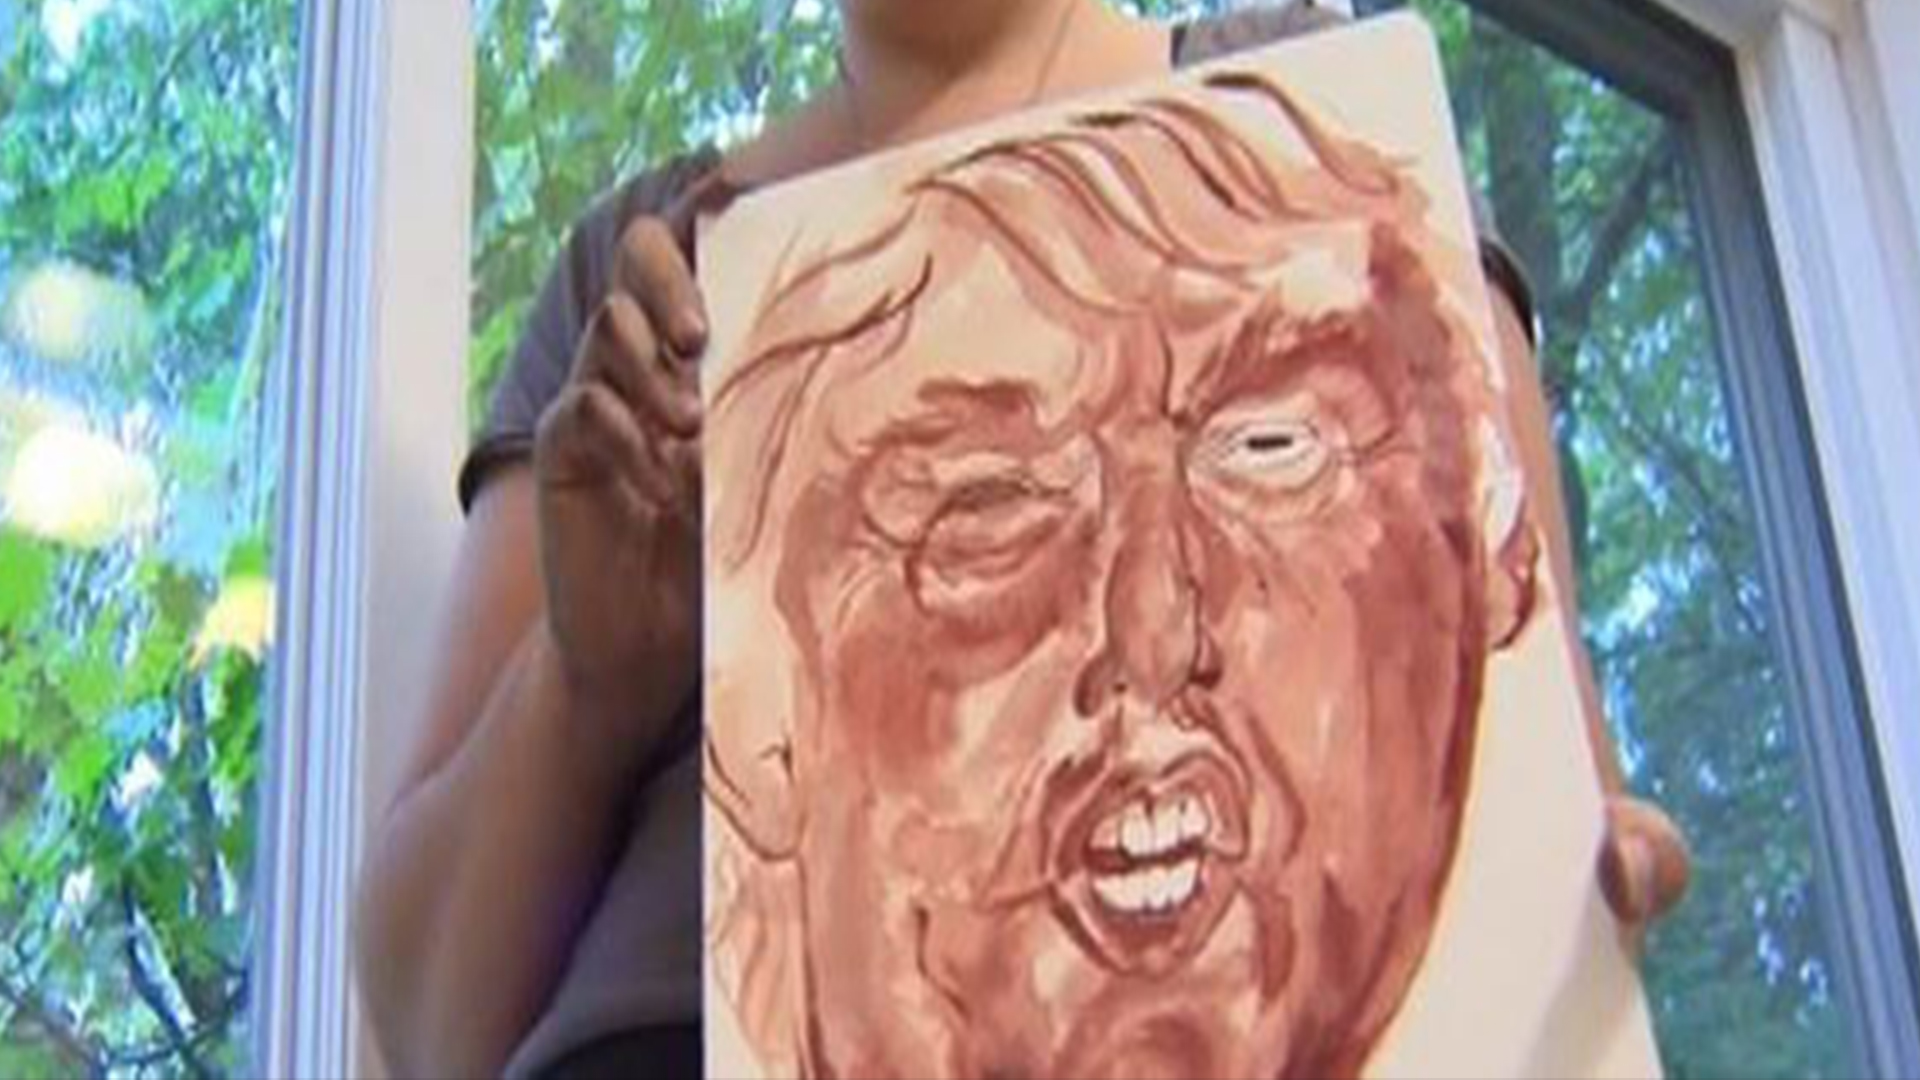 Artist Uses Her Menstrual Blood to Paint Donald Trump - NBC News